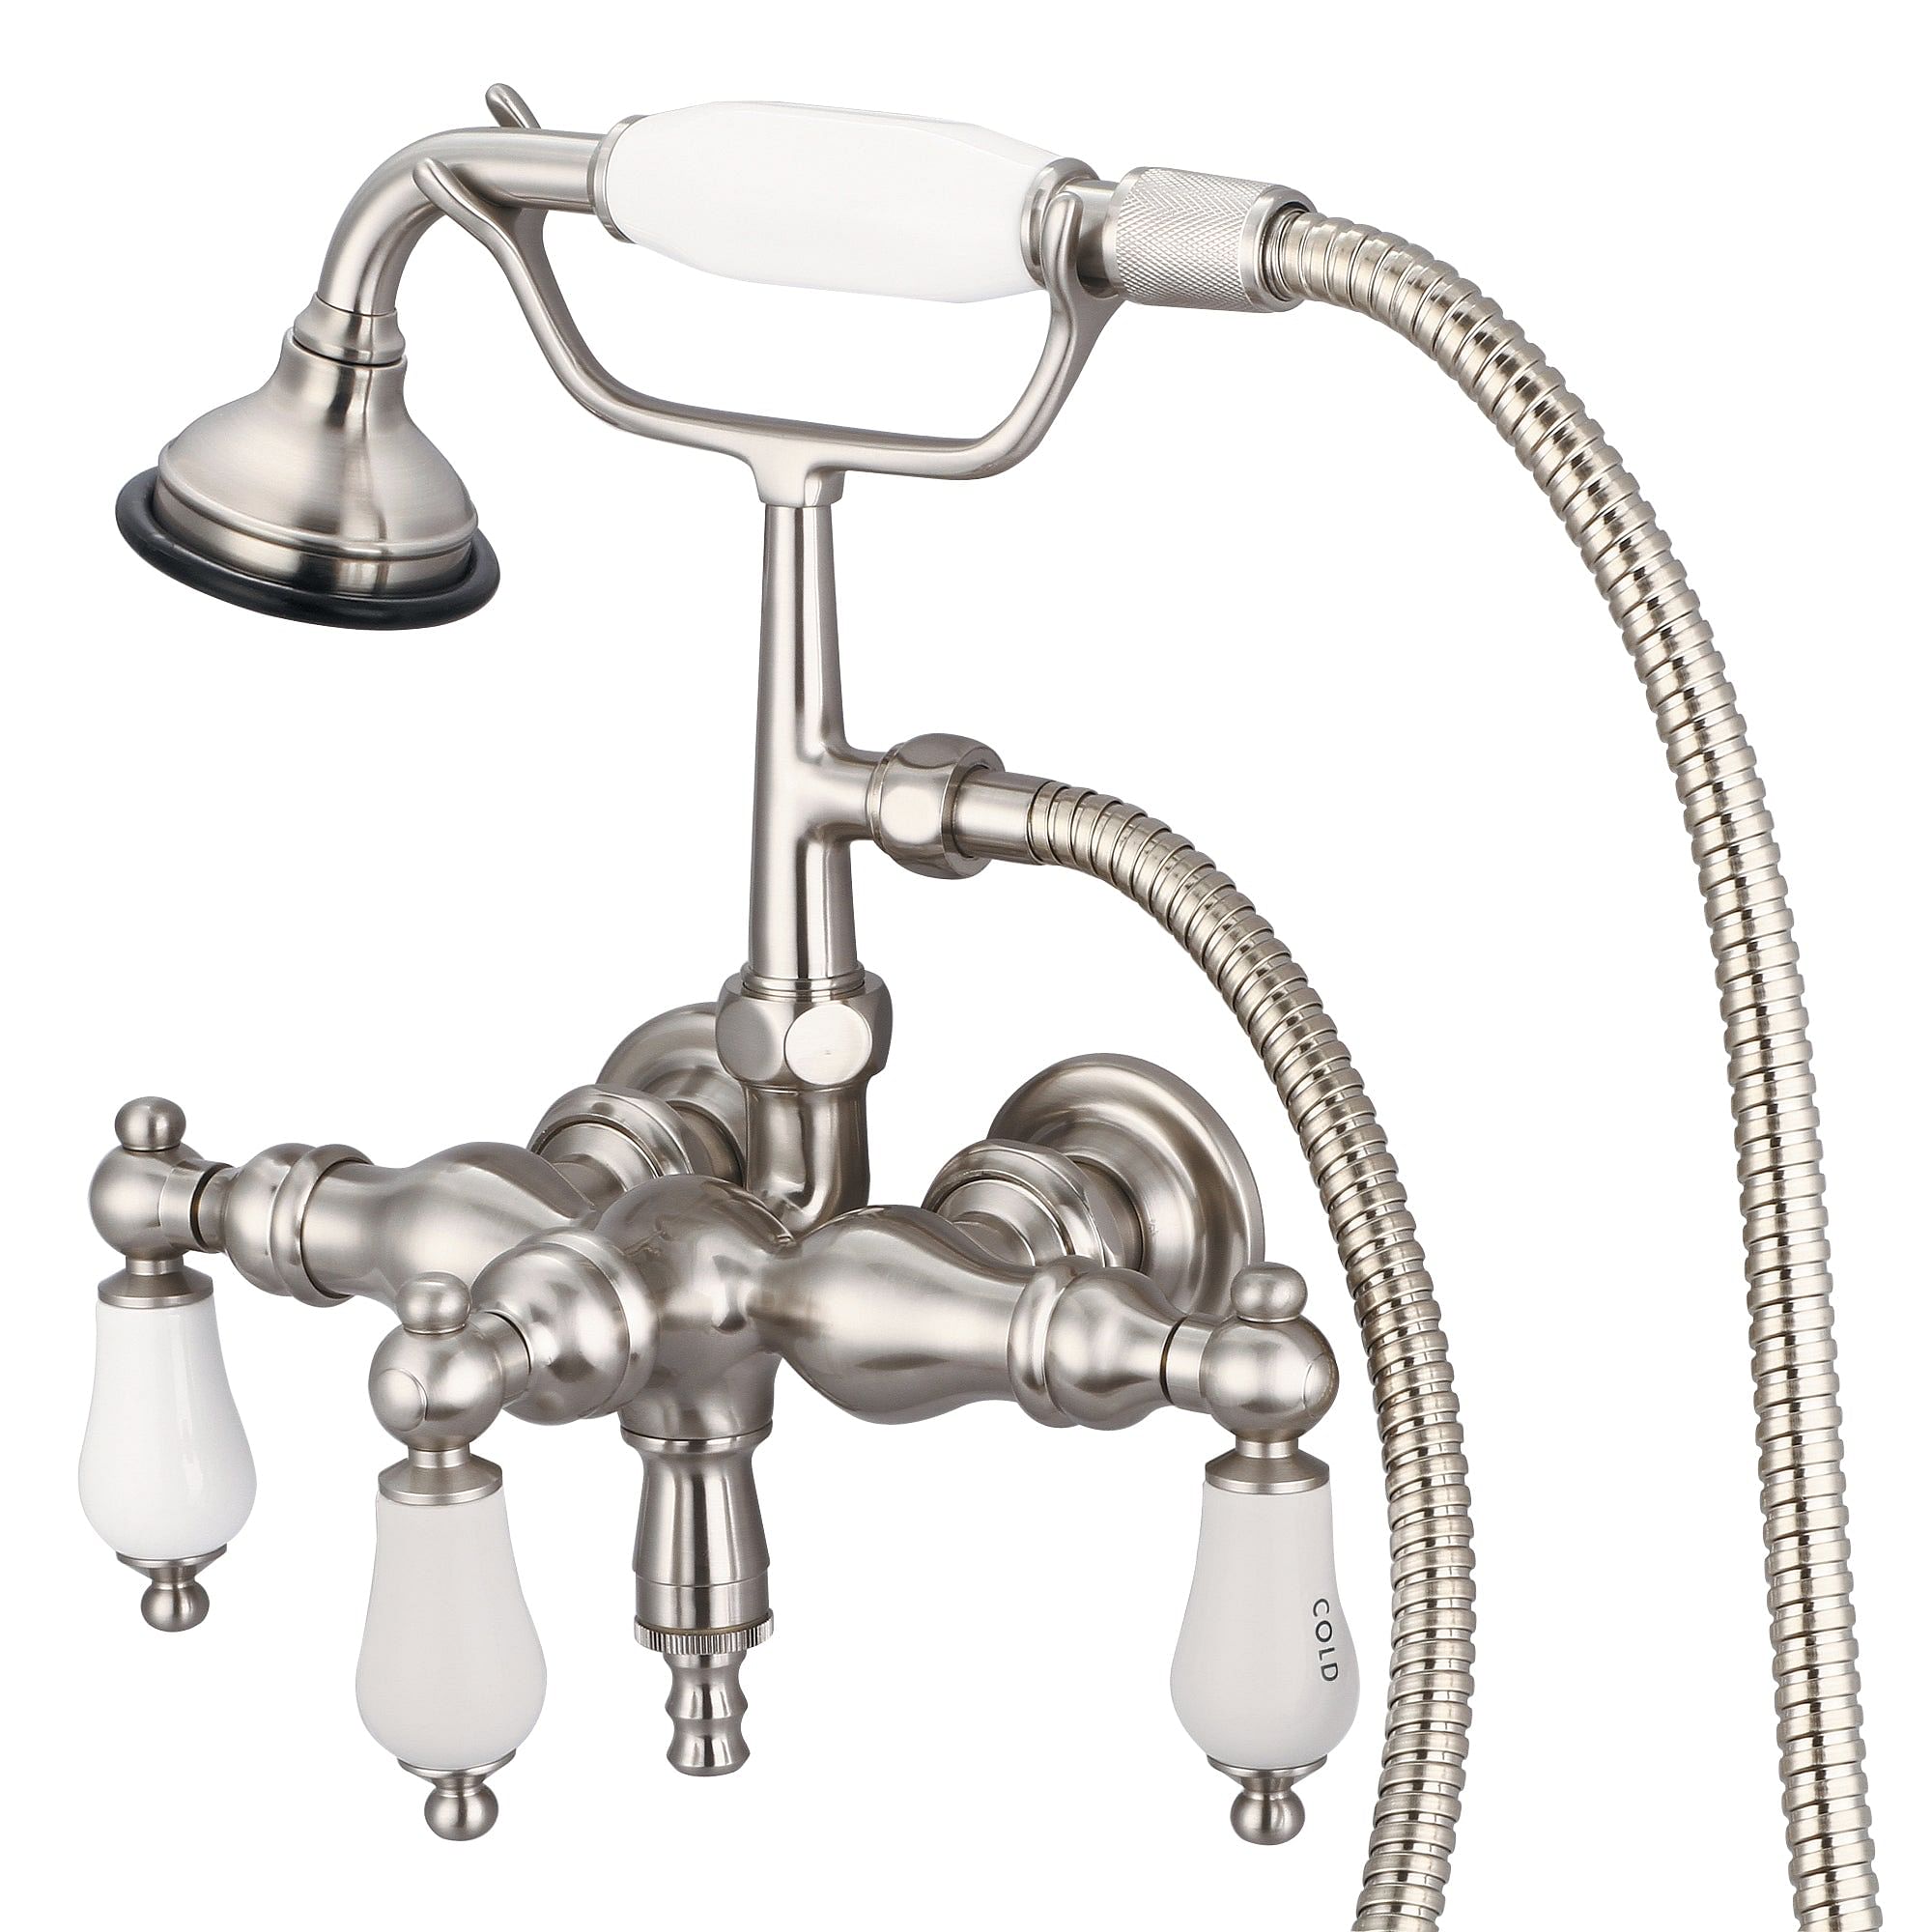 Vintage Classic 3.375 Inch Center Wall Mount Tub Faucet With Down Spout, Straight Wall Connector & Handheld Shower in Brushed Nickel Finish With Porcelain Lever Handles, Hot And Cold Labels Included